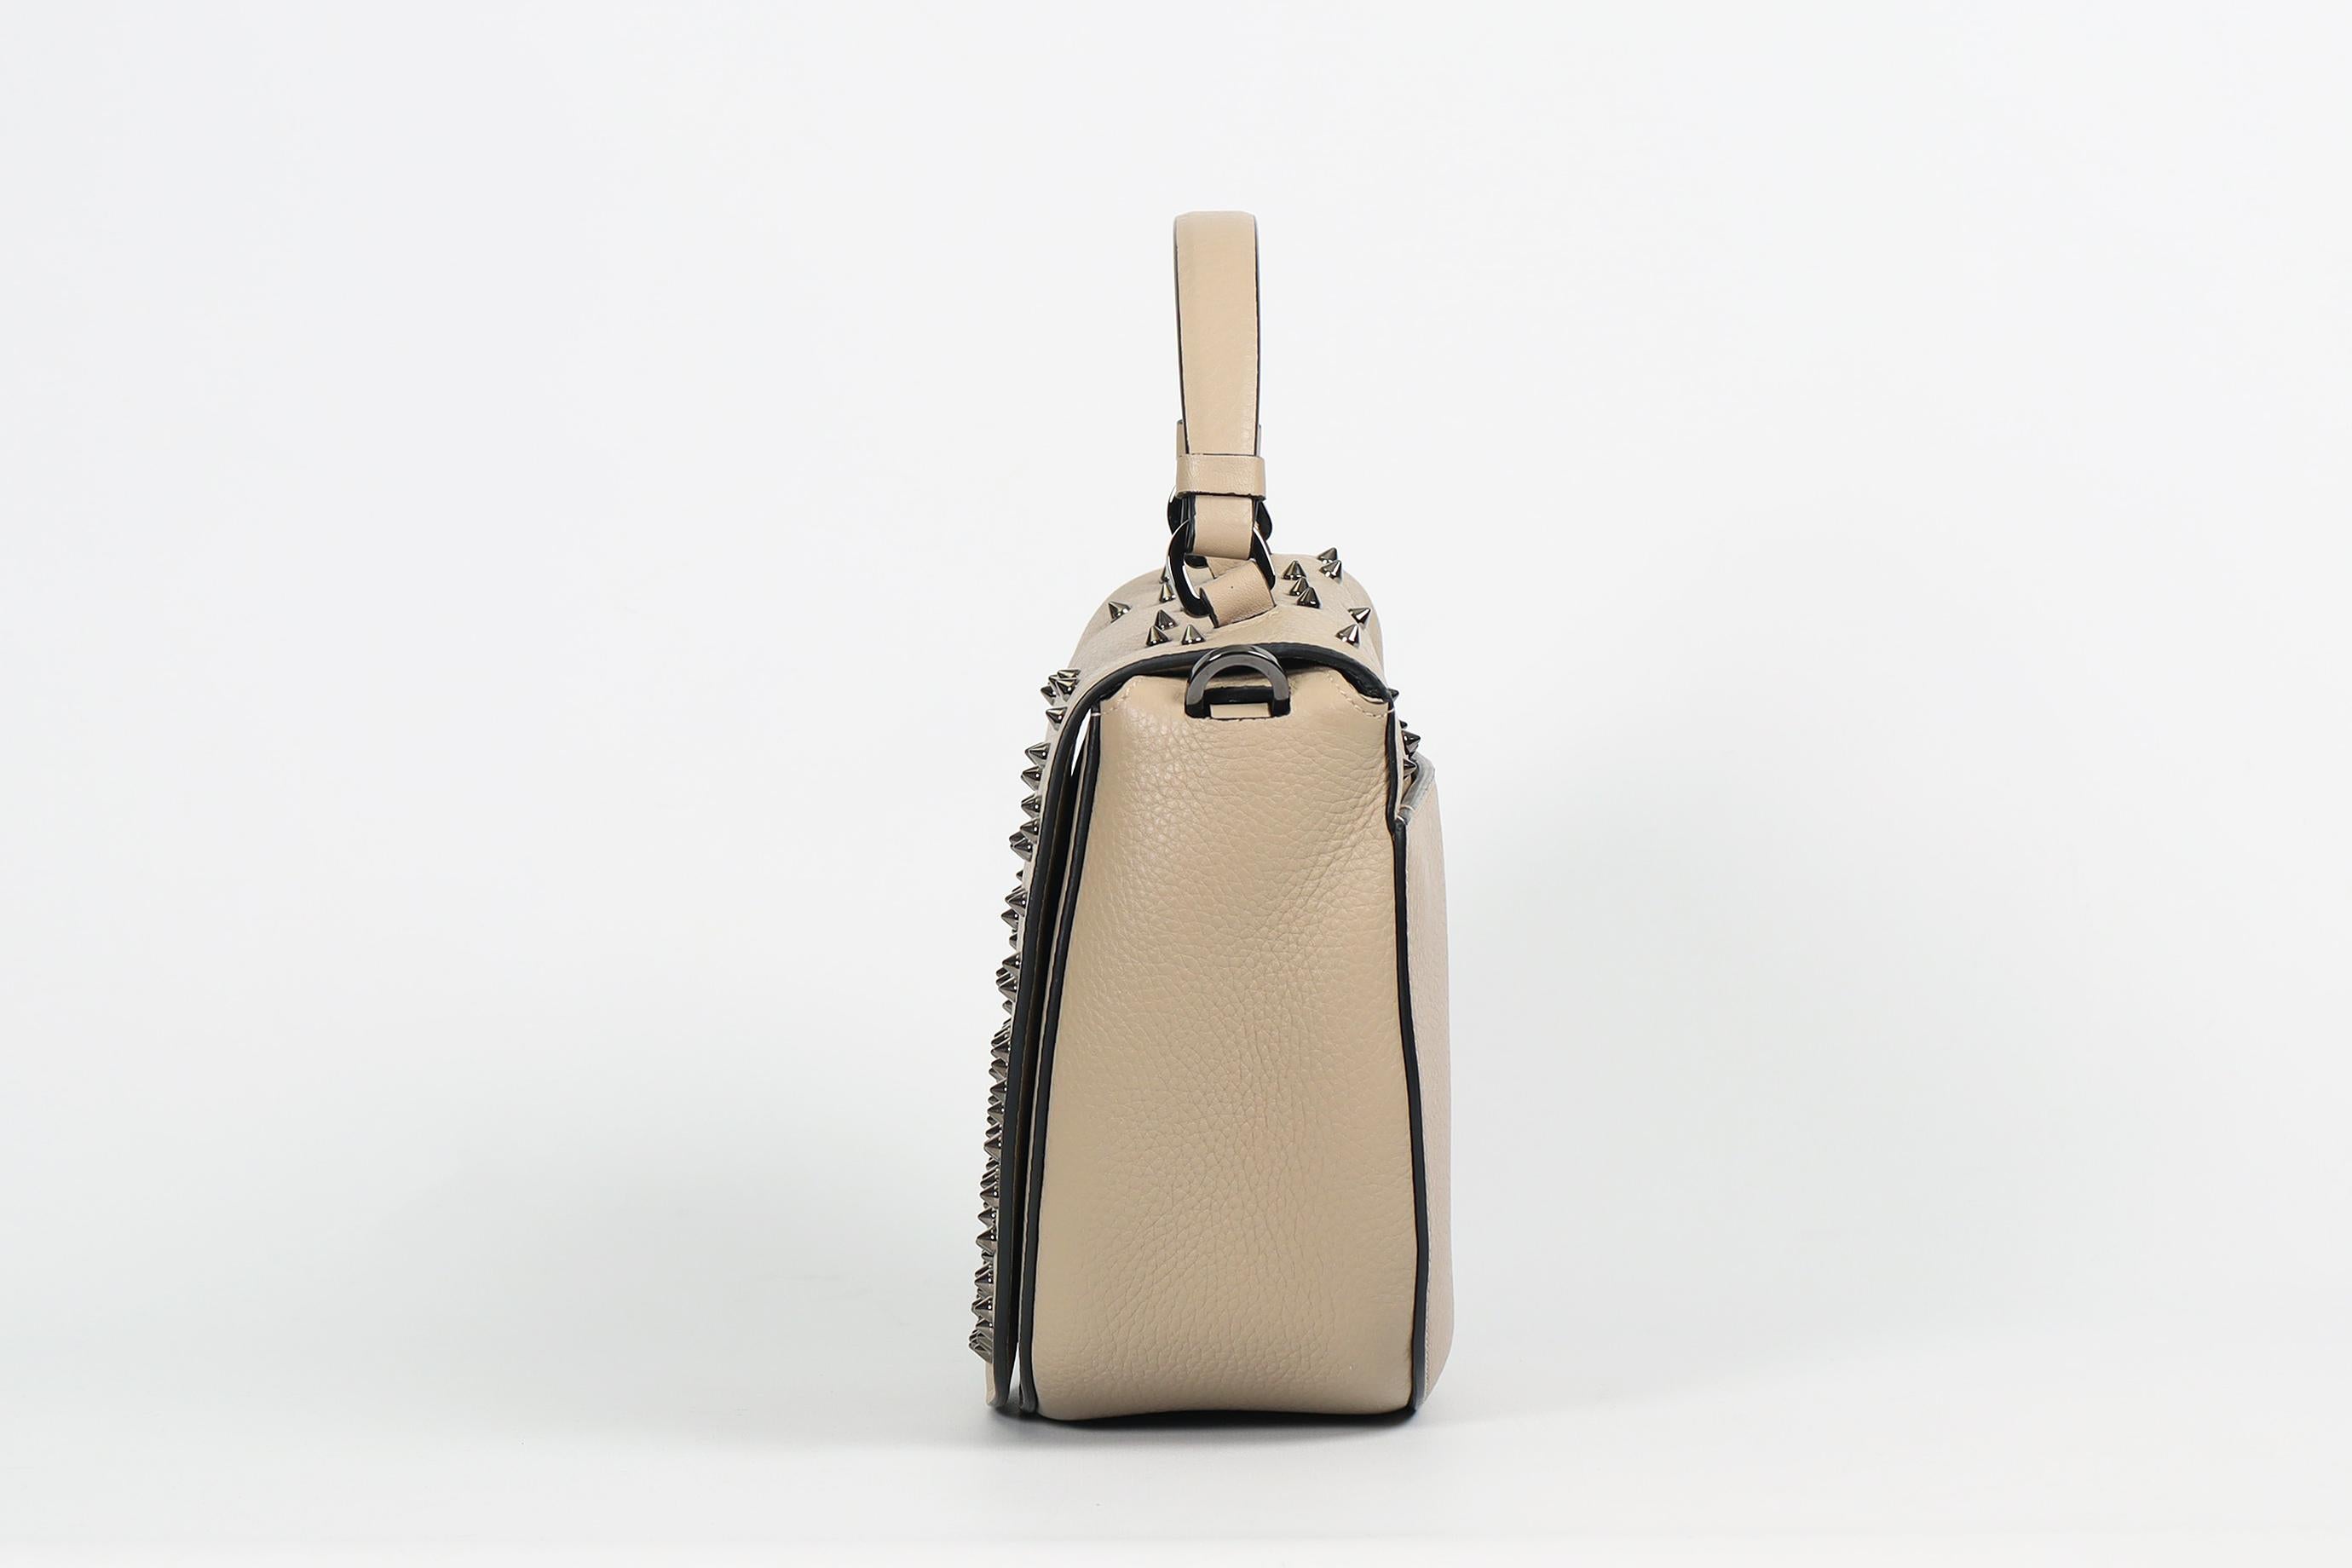 Women's Christian Louboutin Panettone Spiked Leather Shoulder Bag For Sale